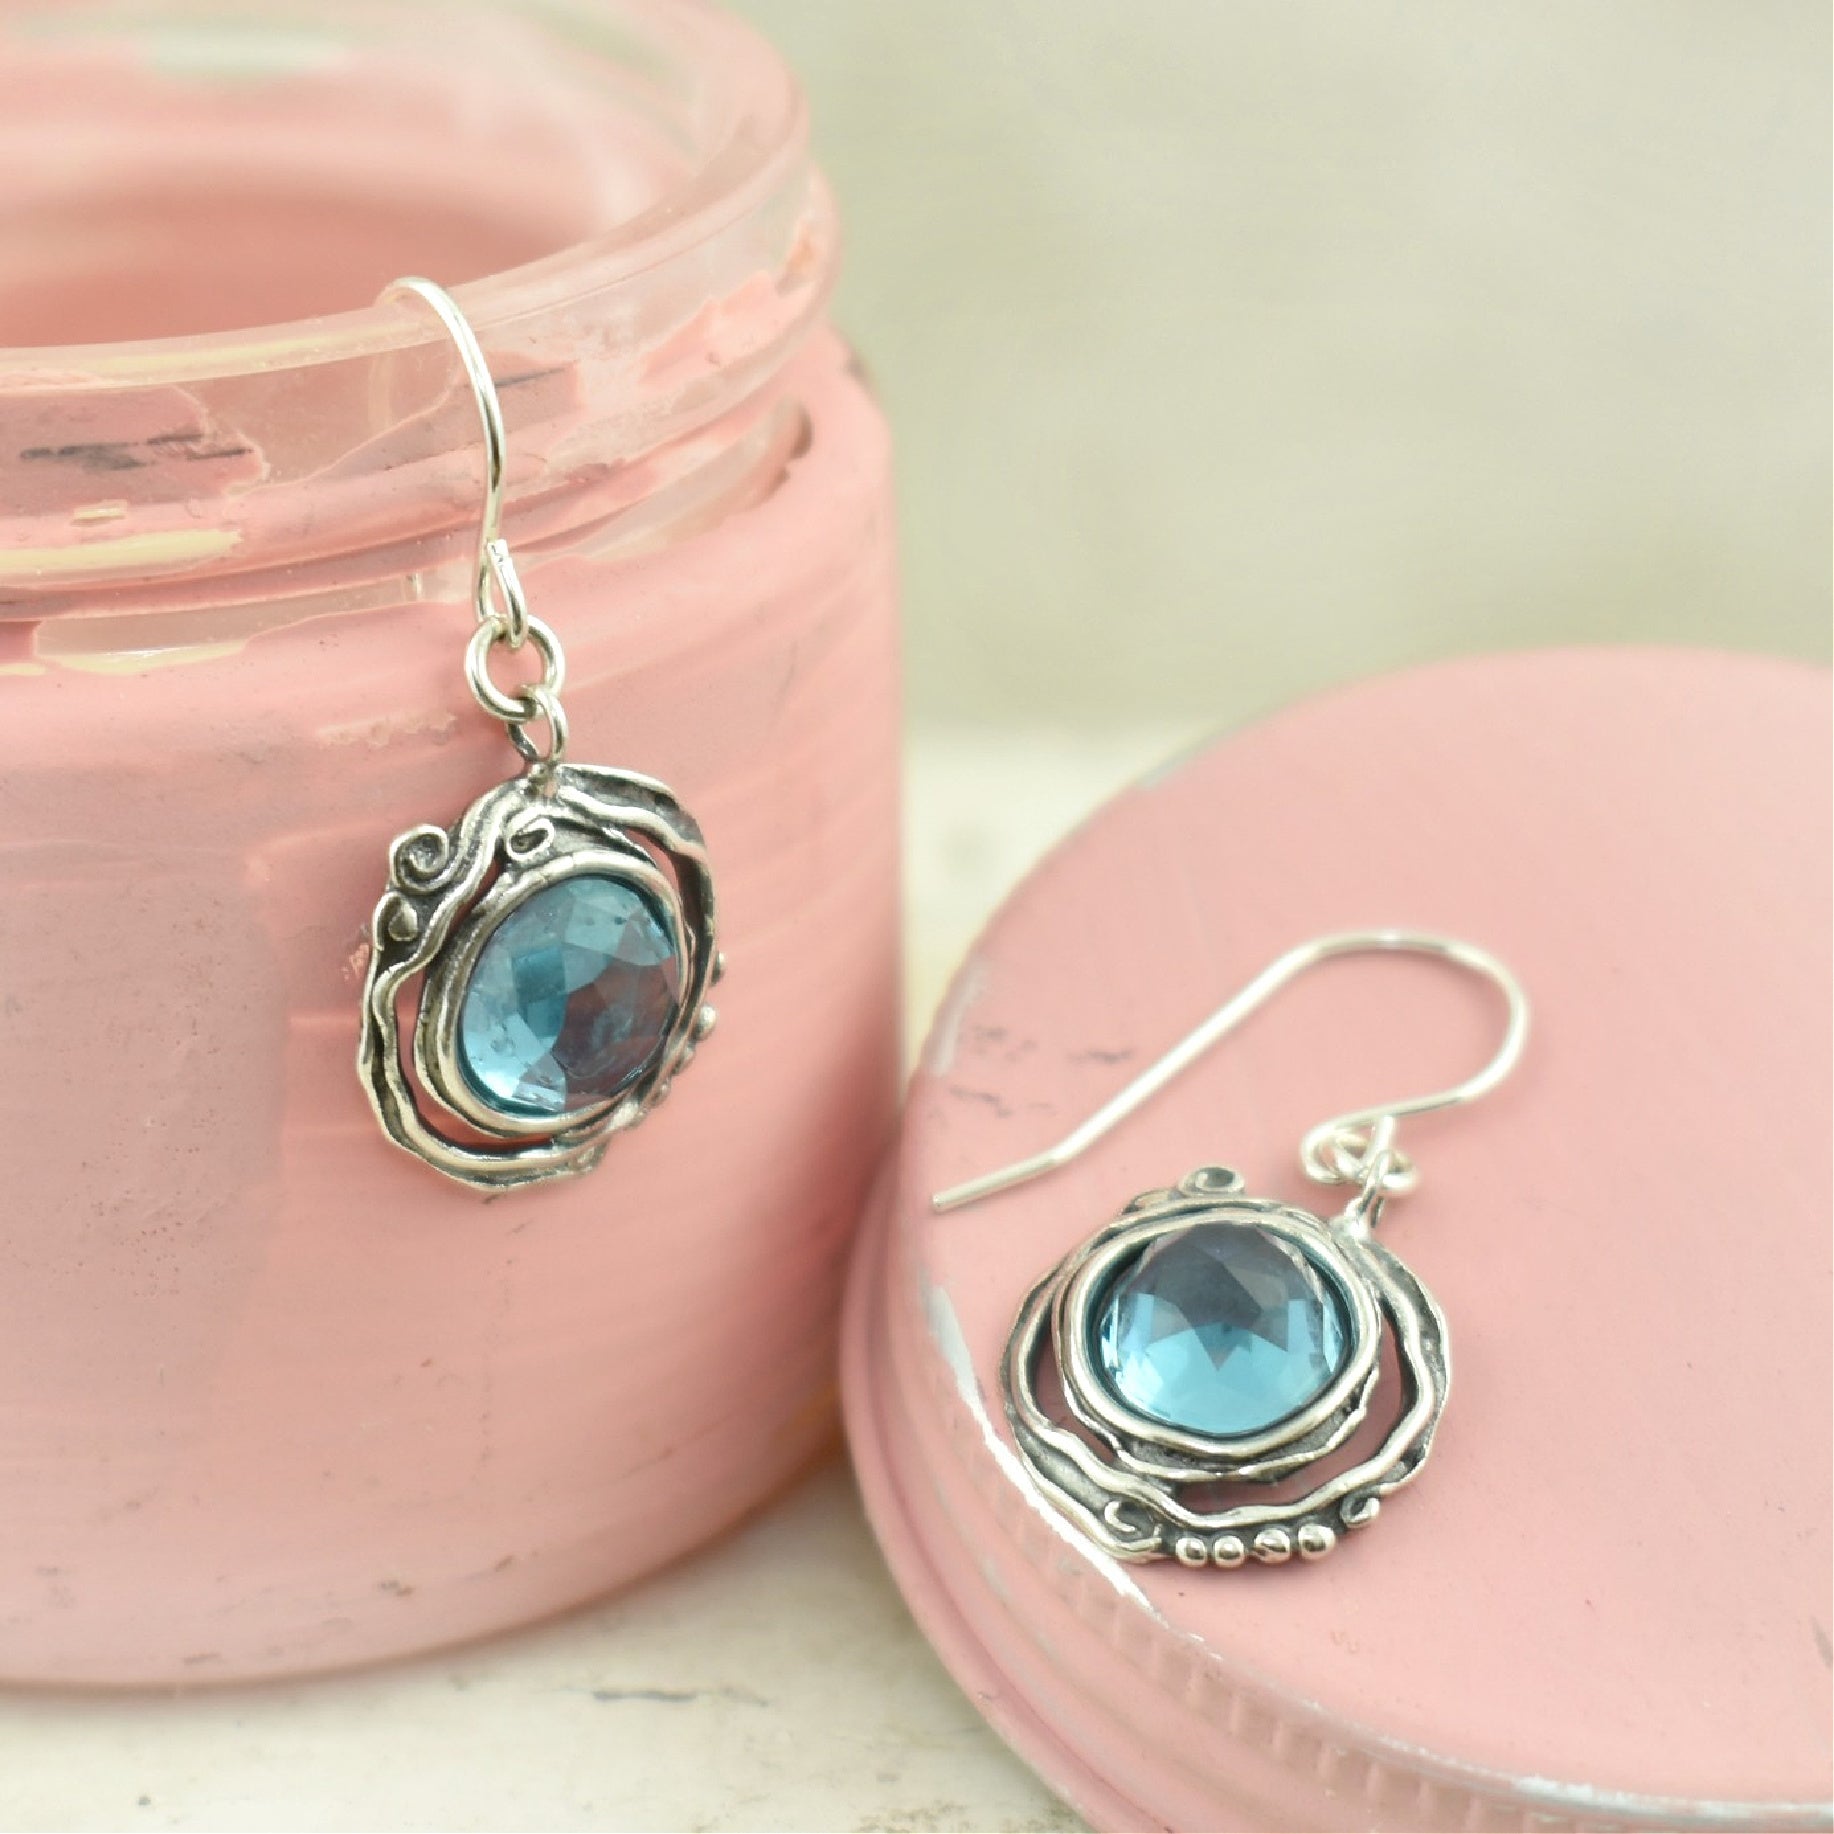 Cool Waters Earrings featuring sterling silver and faux blue topaz